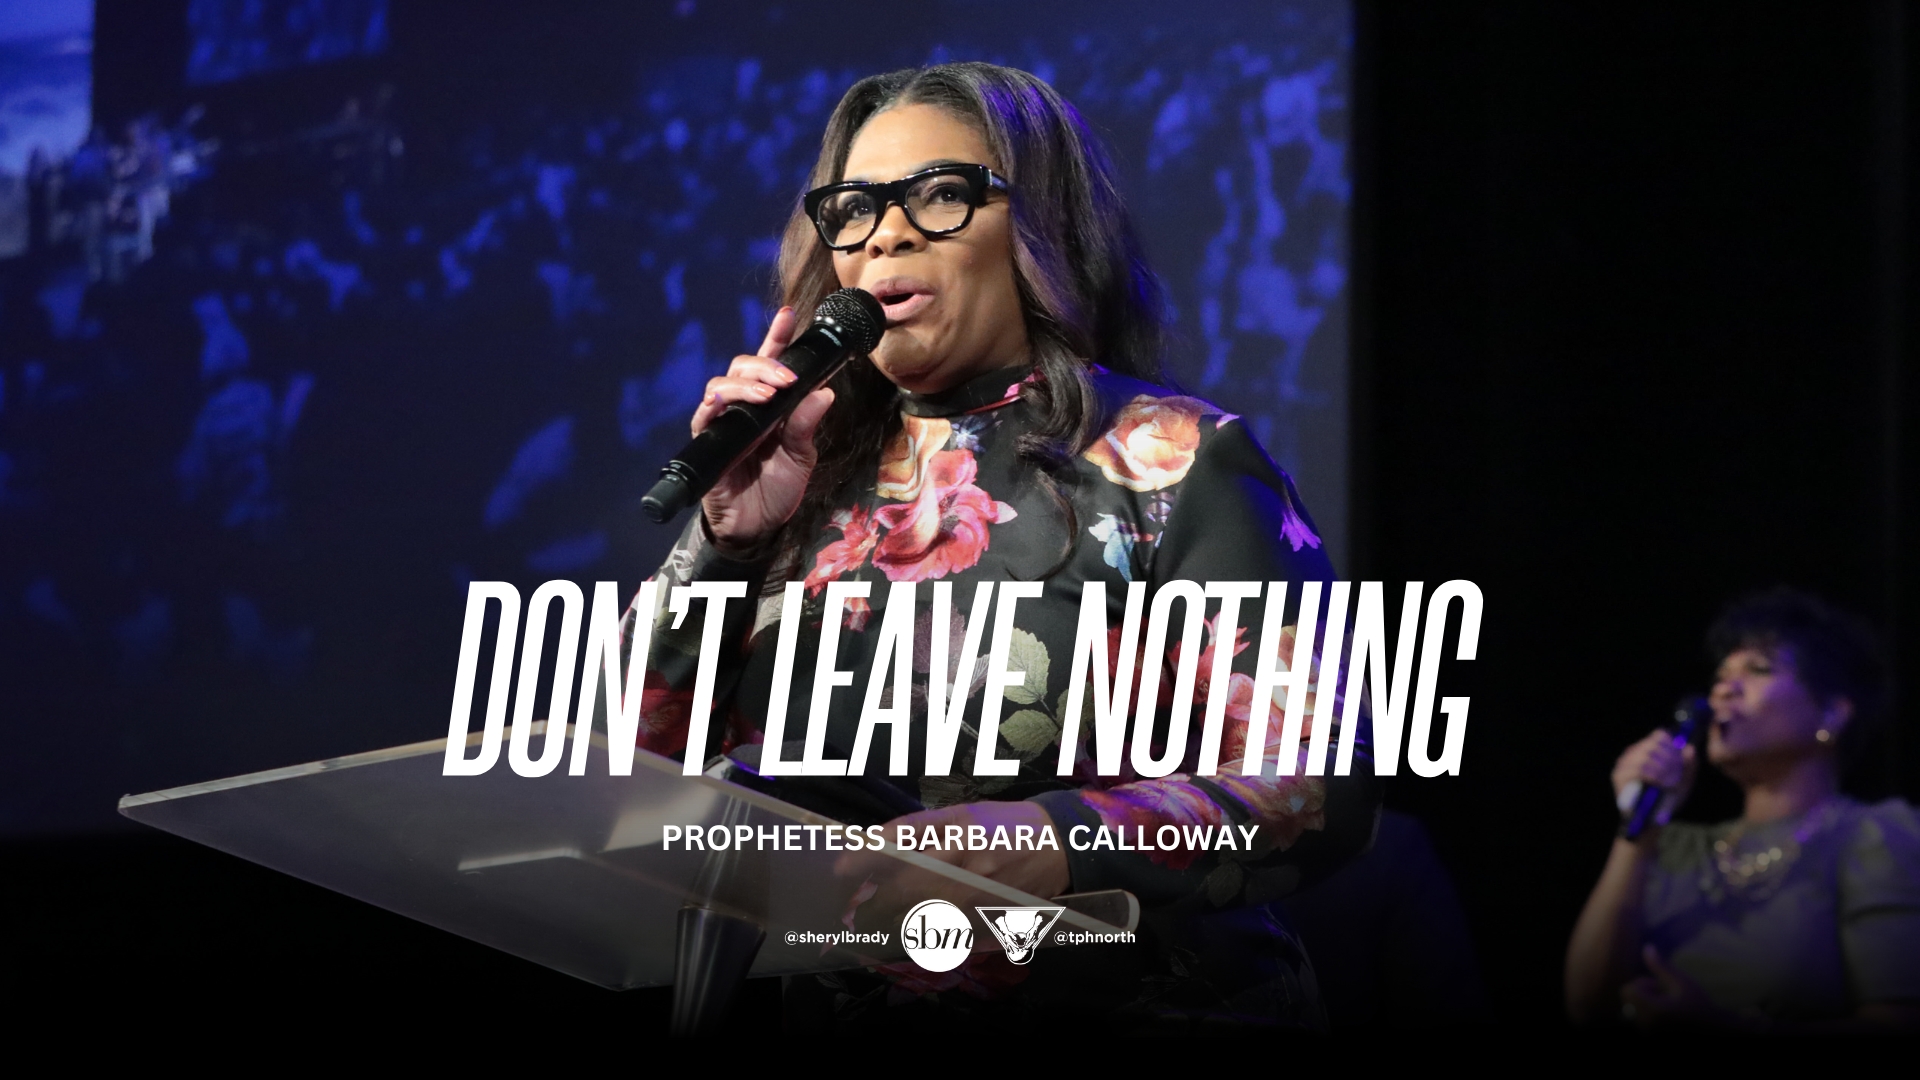 Latest sermon speaker featured image, typically Pastor Sheryl Brady or an associate Pastor of The Potter's House of North Dallas in Frisco, Texas